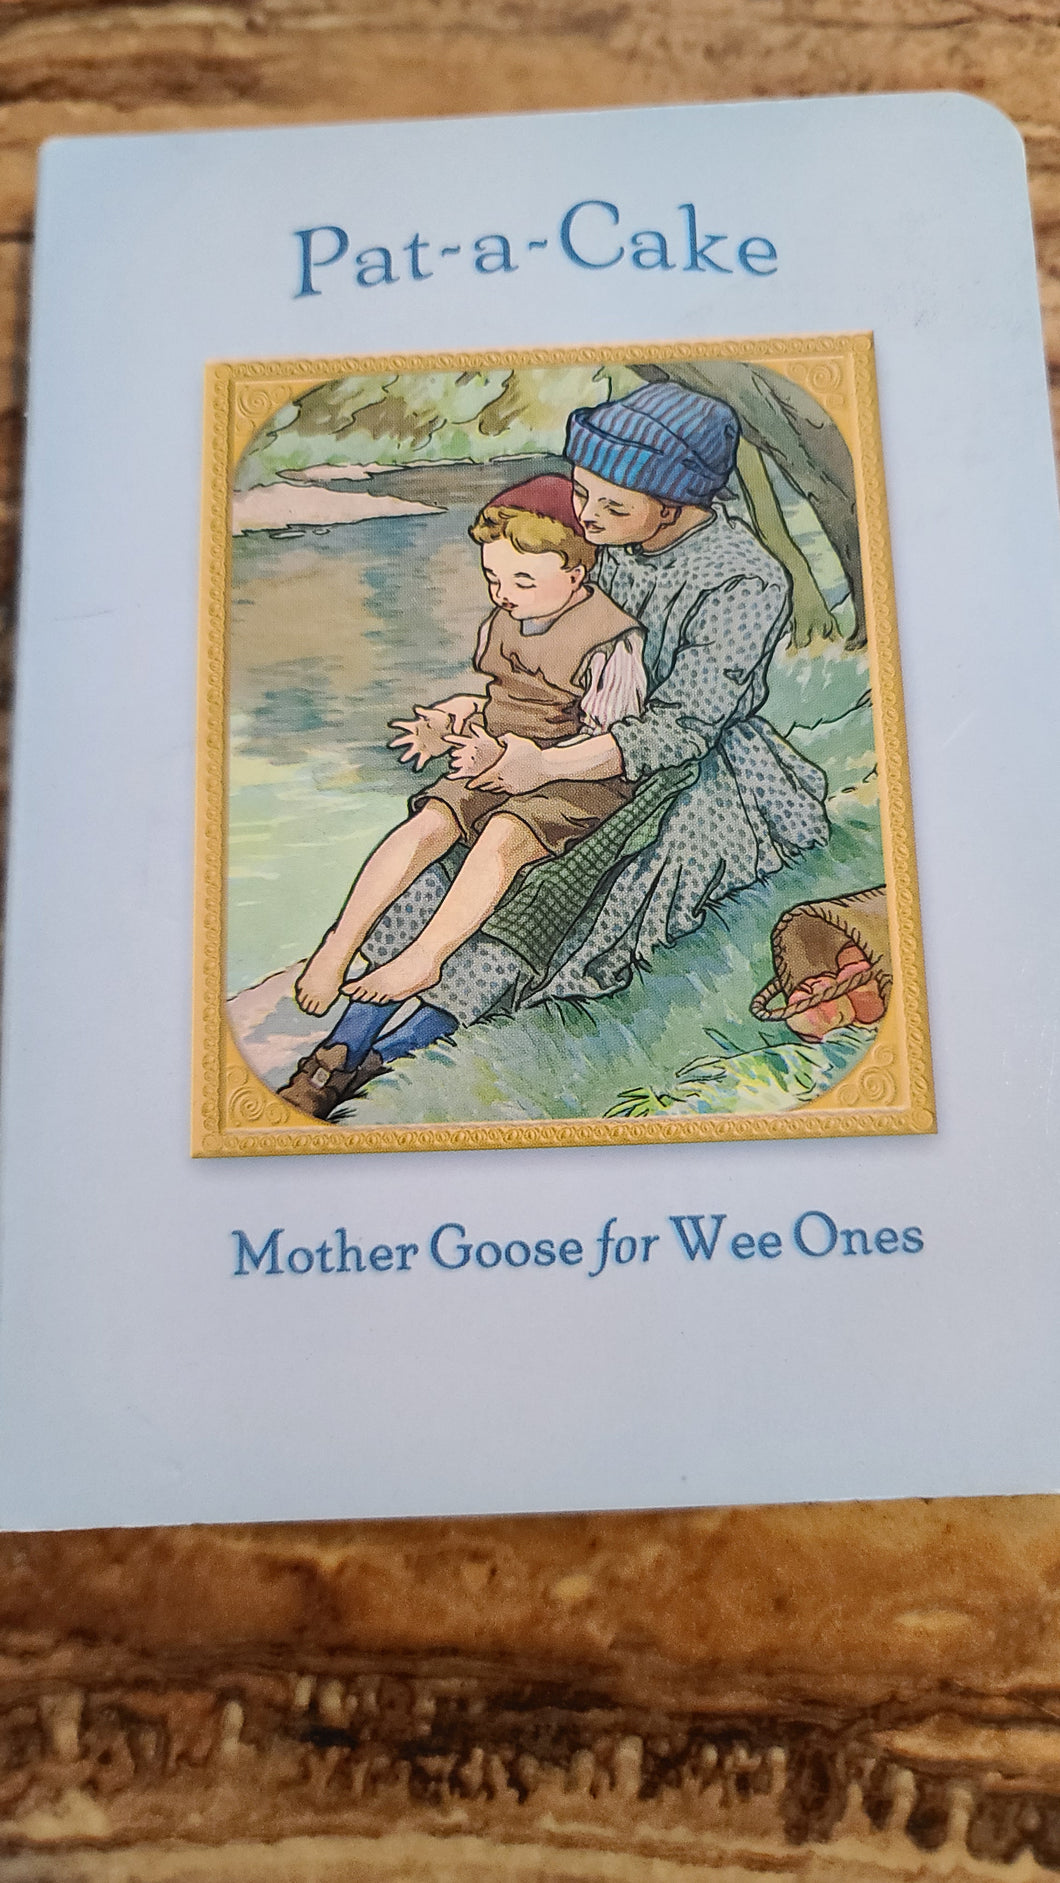 Pat-a-Cake Mother Goose for Wee Ones